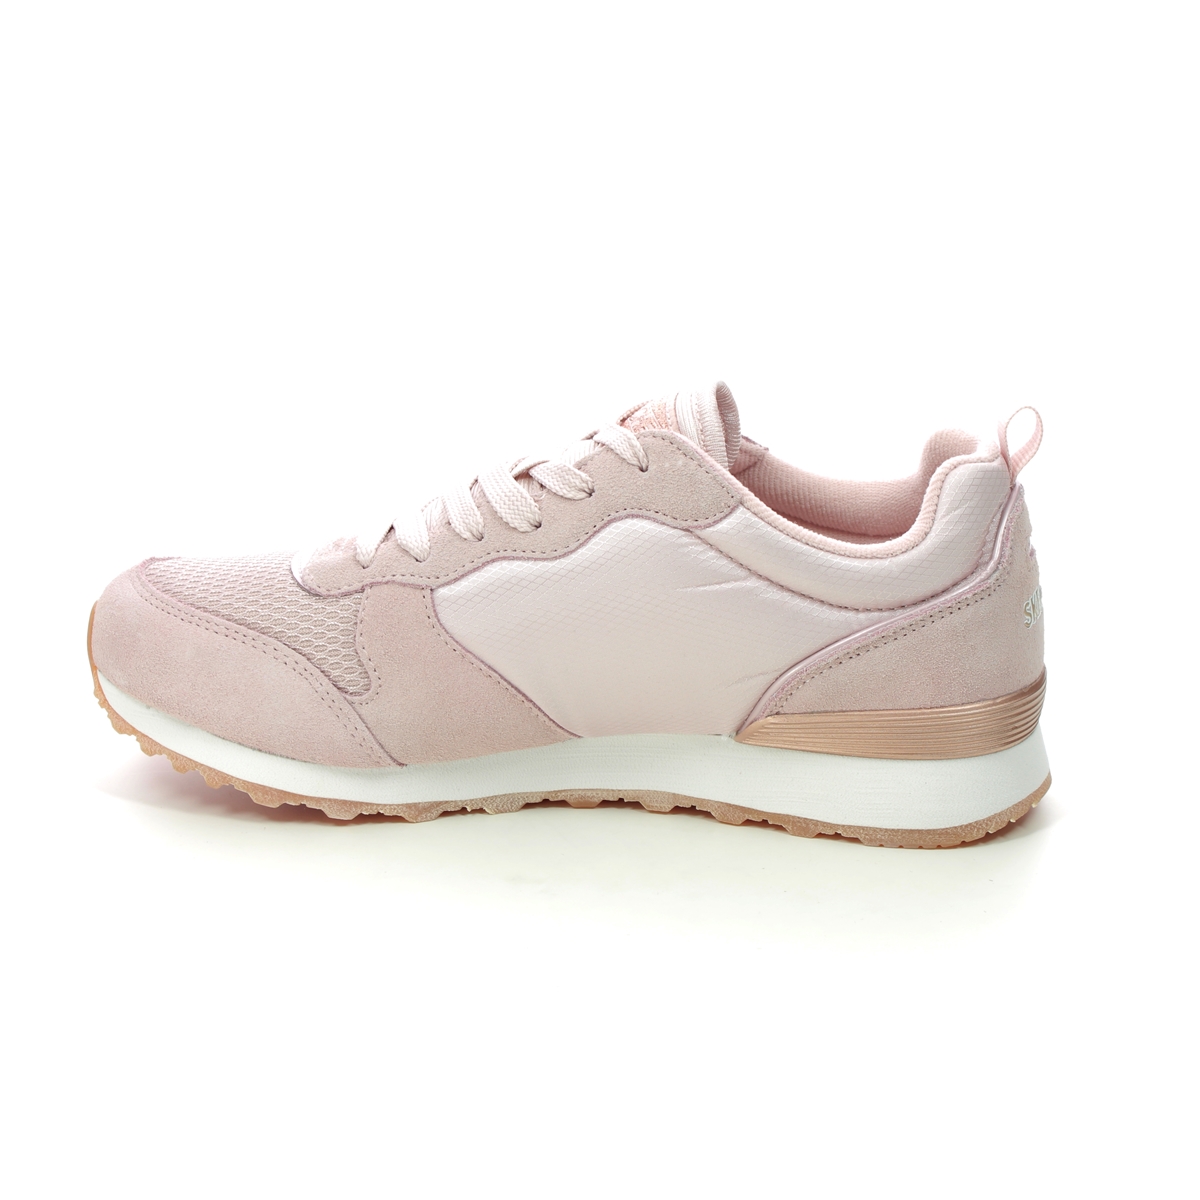 Skechers 85 Gold 111 BLSH Pink trainers